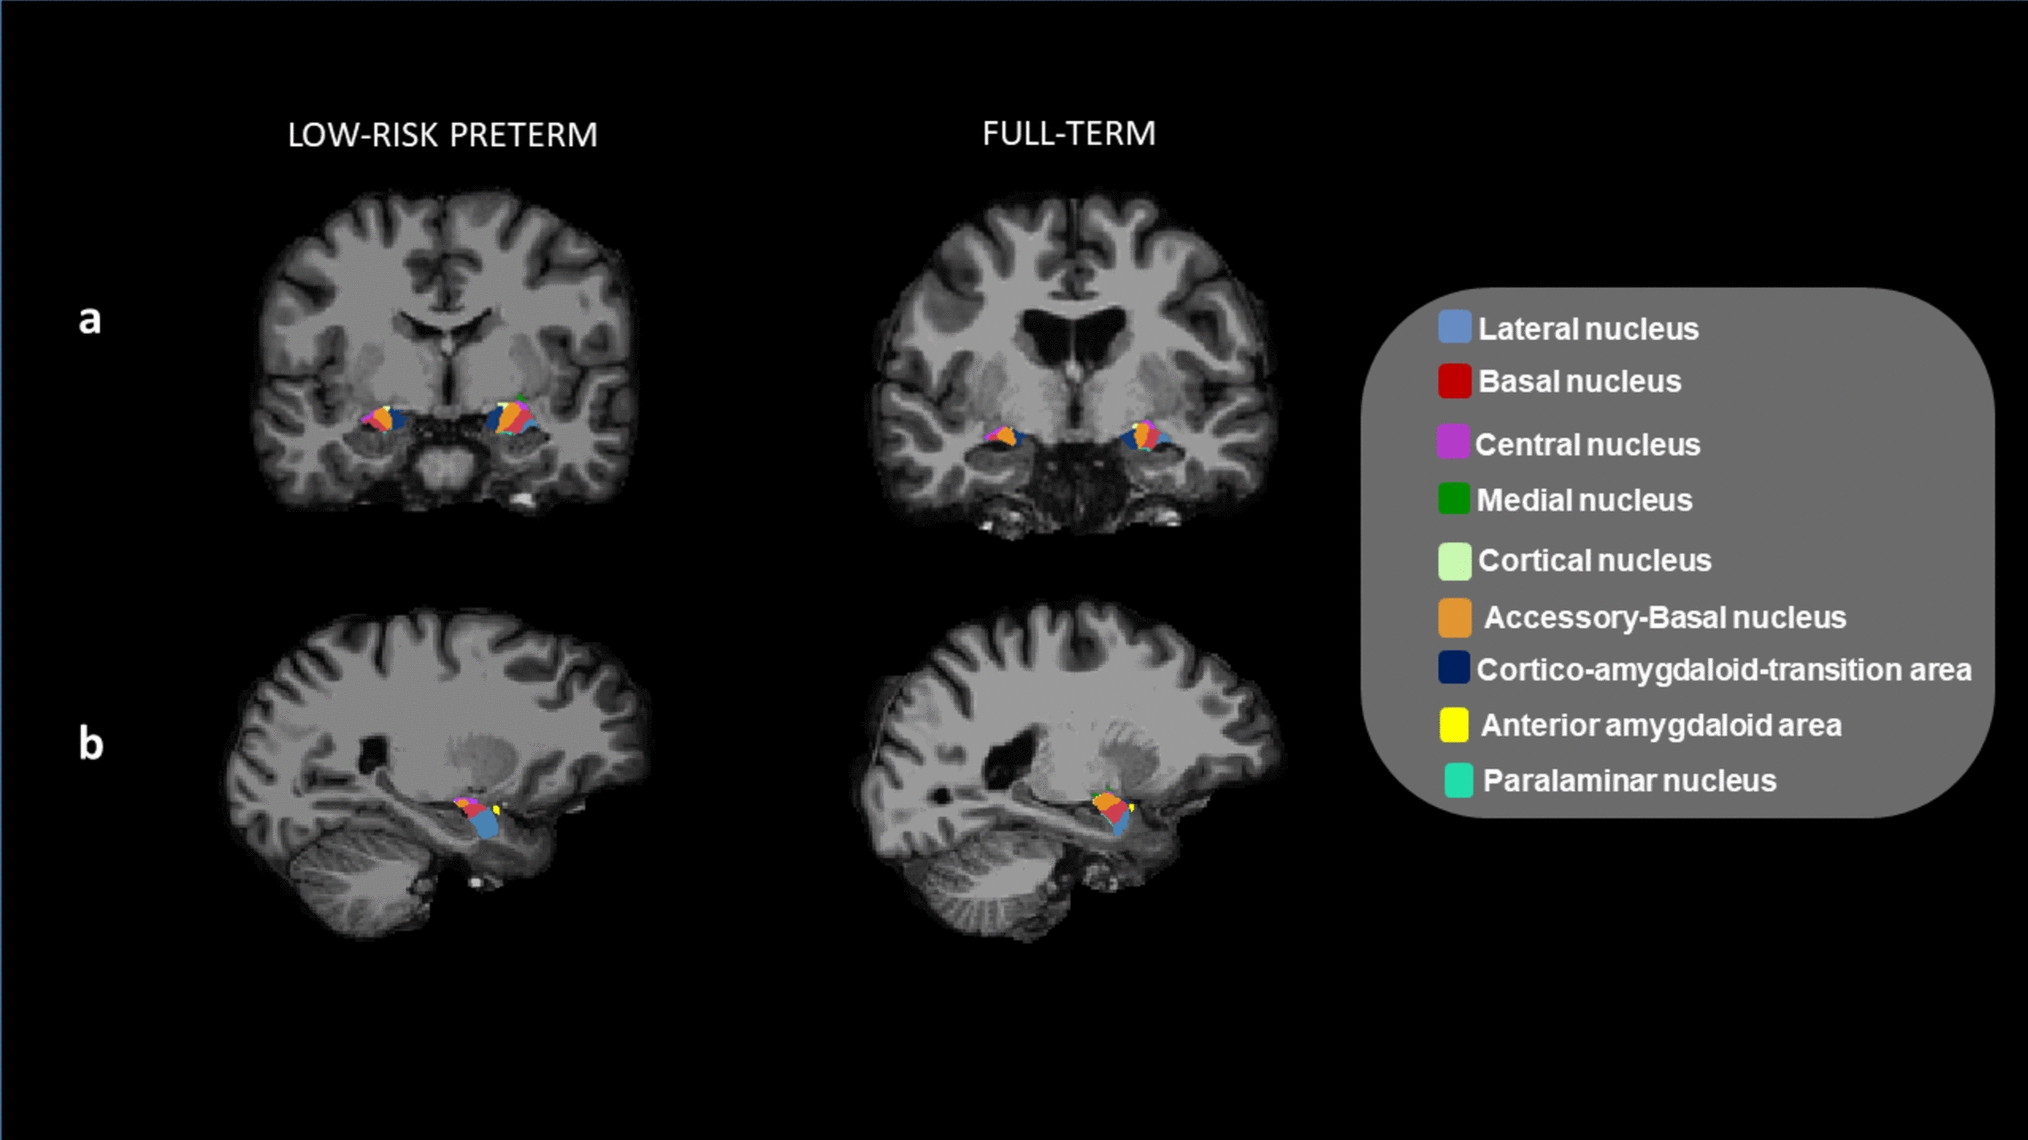 Amygdala structure and function and its associations with social-emotional outcomes in a low-risk preterm sample